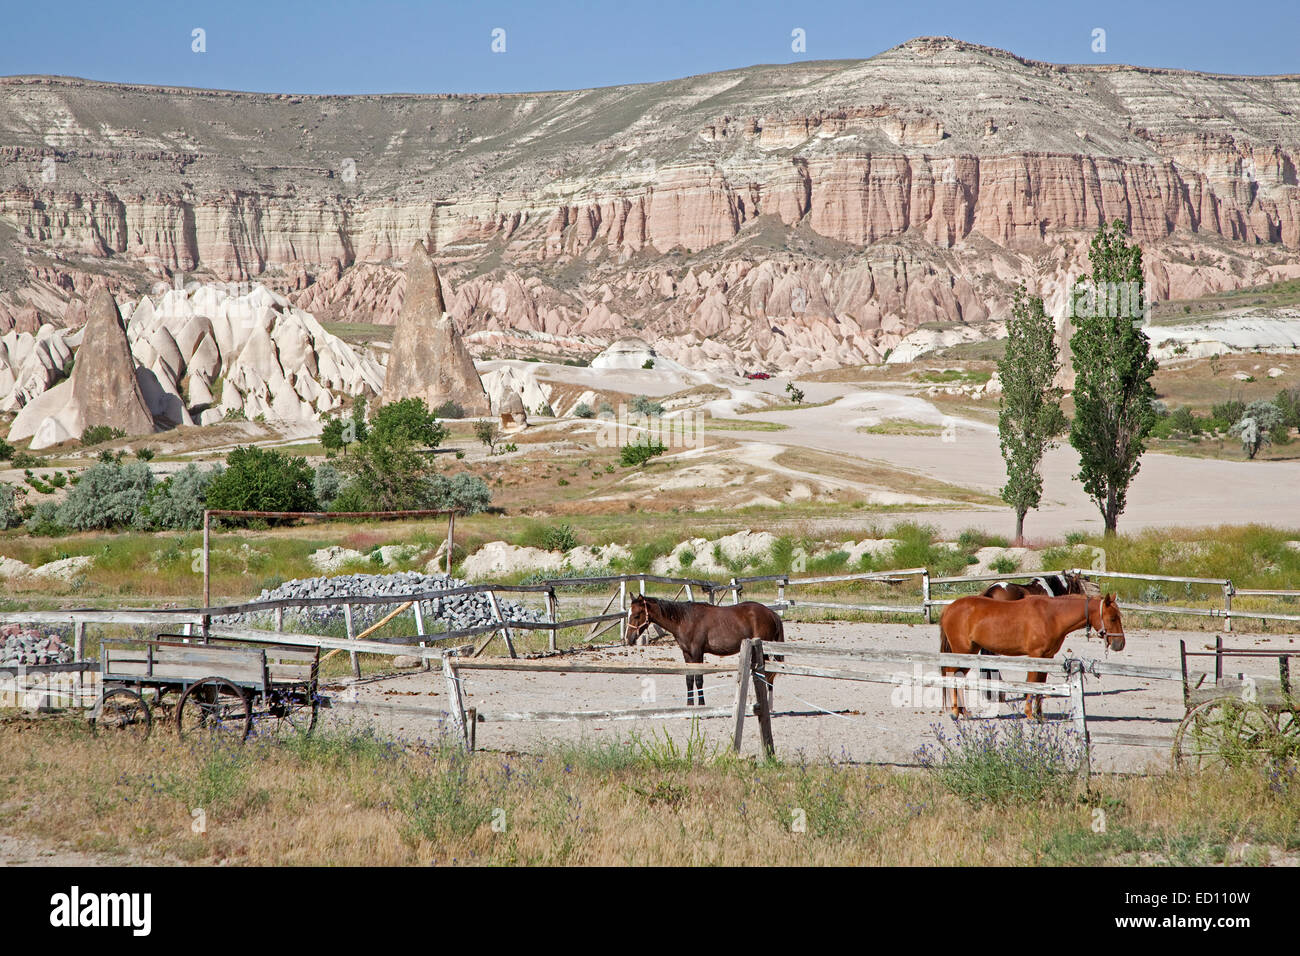 Horses in wooden corral and eroded white and pink sandstone rock formations at Cappadocia in Central Anatolia, Turkey Stock Photo